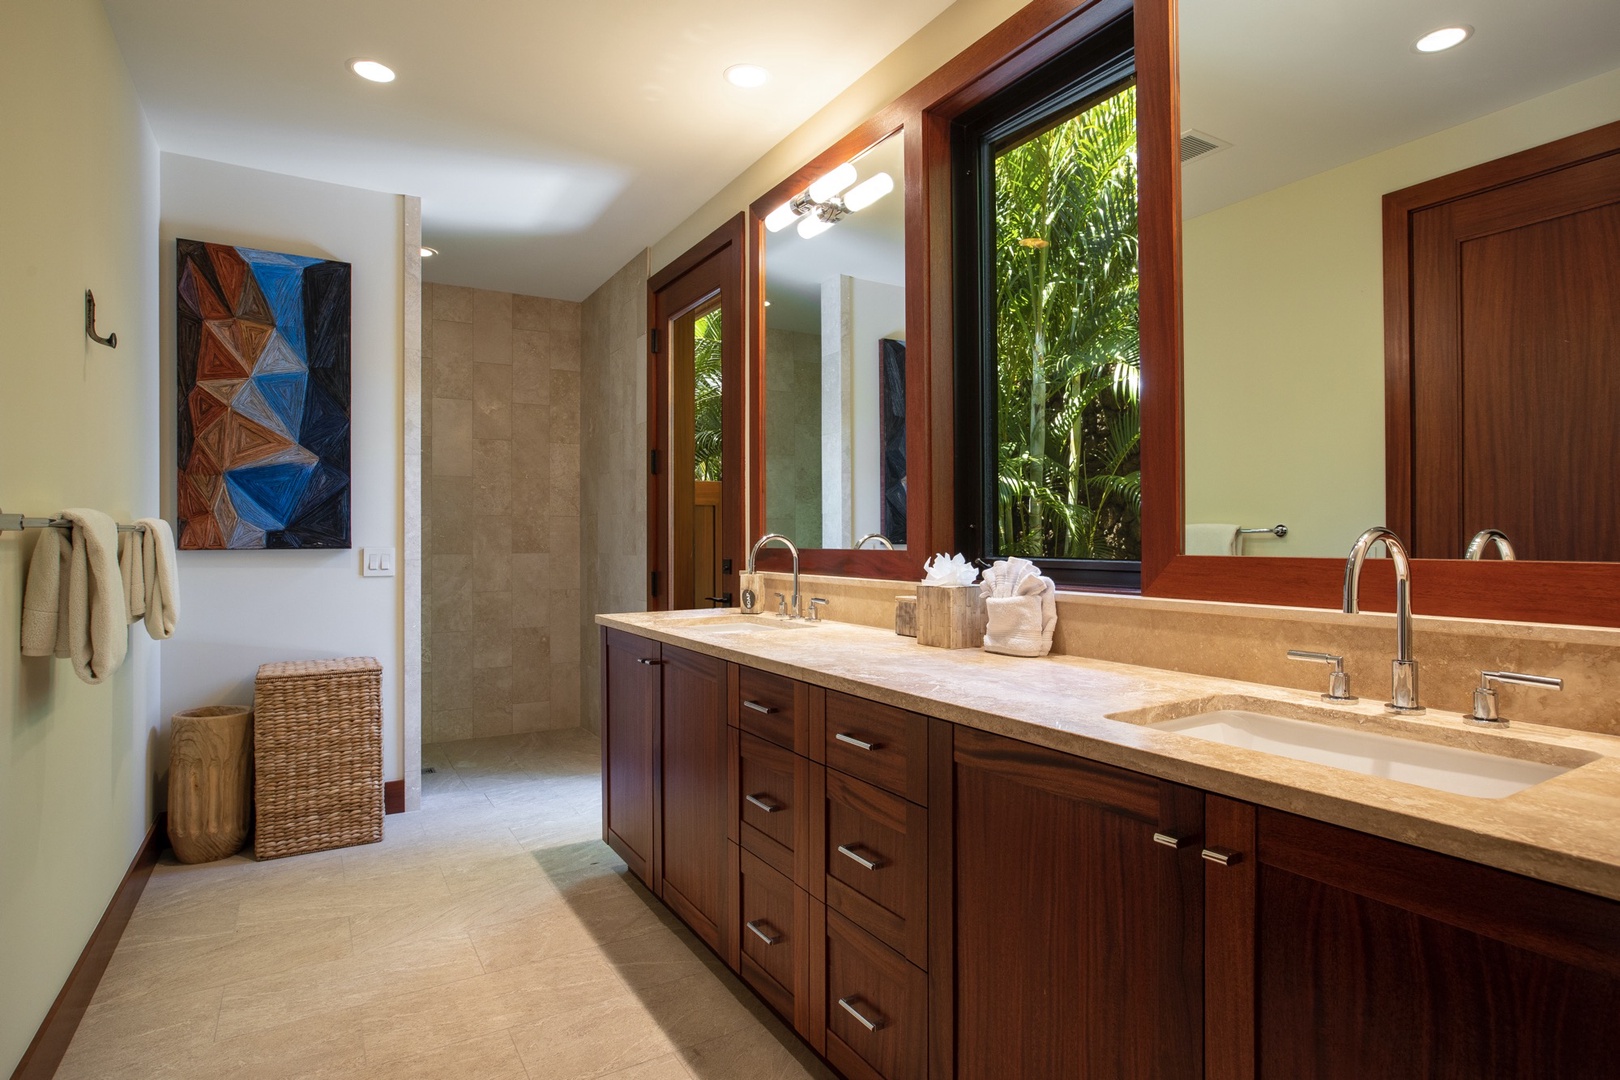 Kailua Kona Vacation Rentals, 4BD Kulanakauhale (3558) Estate Home at Four Seasons Resort at Hualalai - Guest bedroom one en-suite bath with dual vanities, walk-in shower and outdoor shower garden.